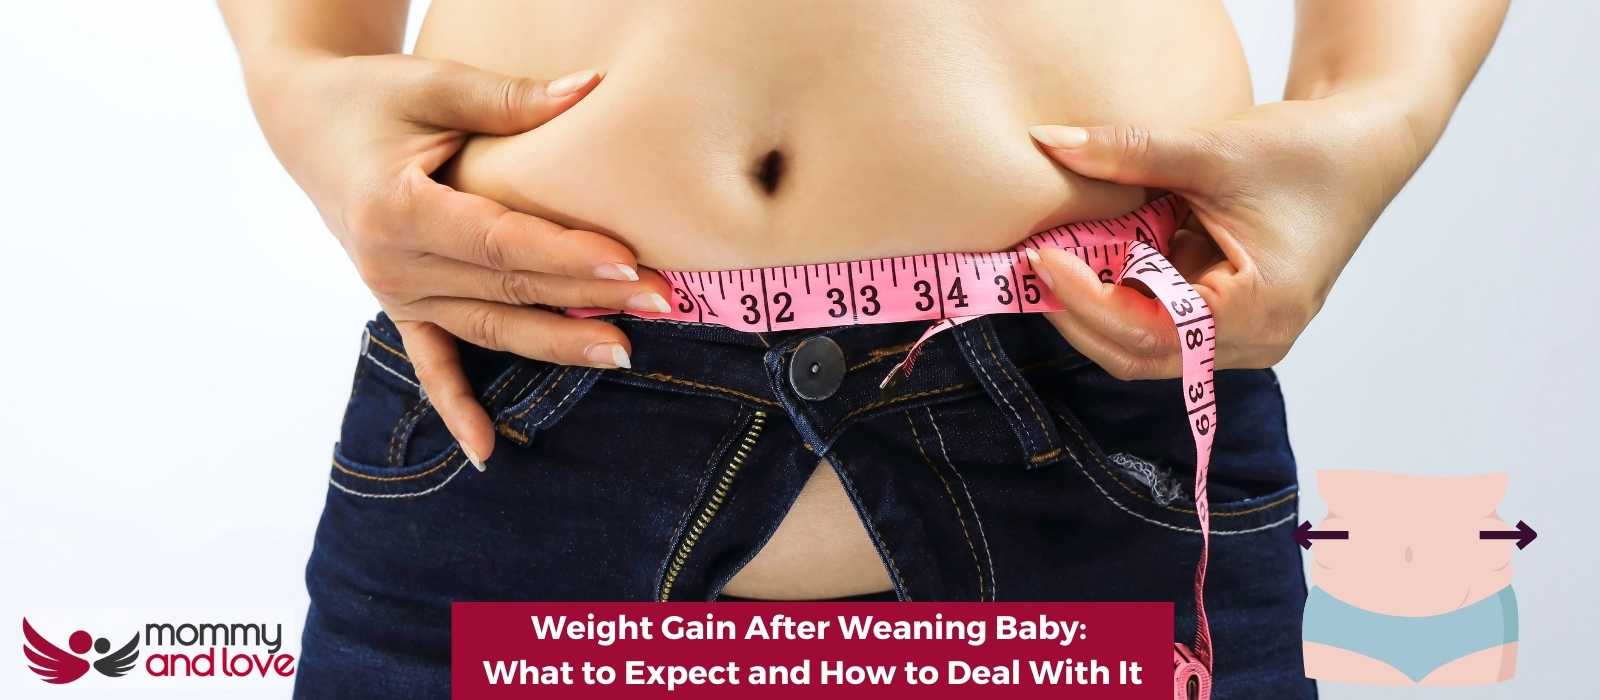 Weight Gain After Weaning Baby What to Expect and How to Deal With It